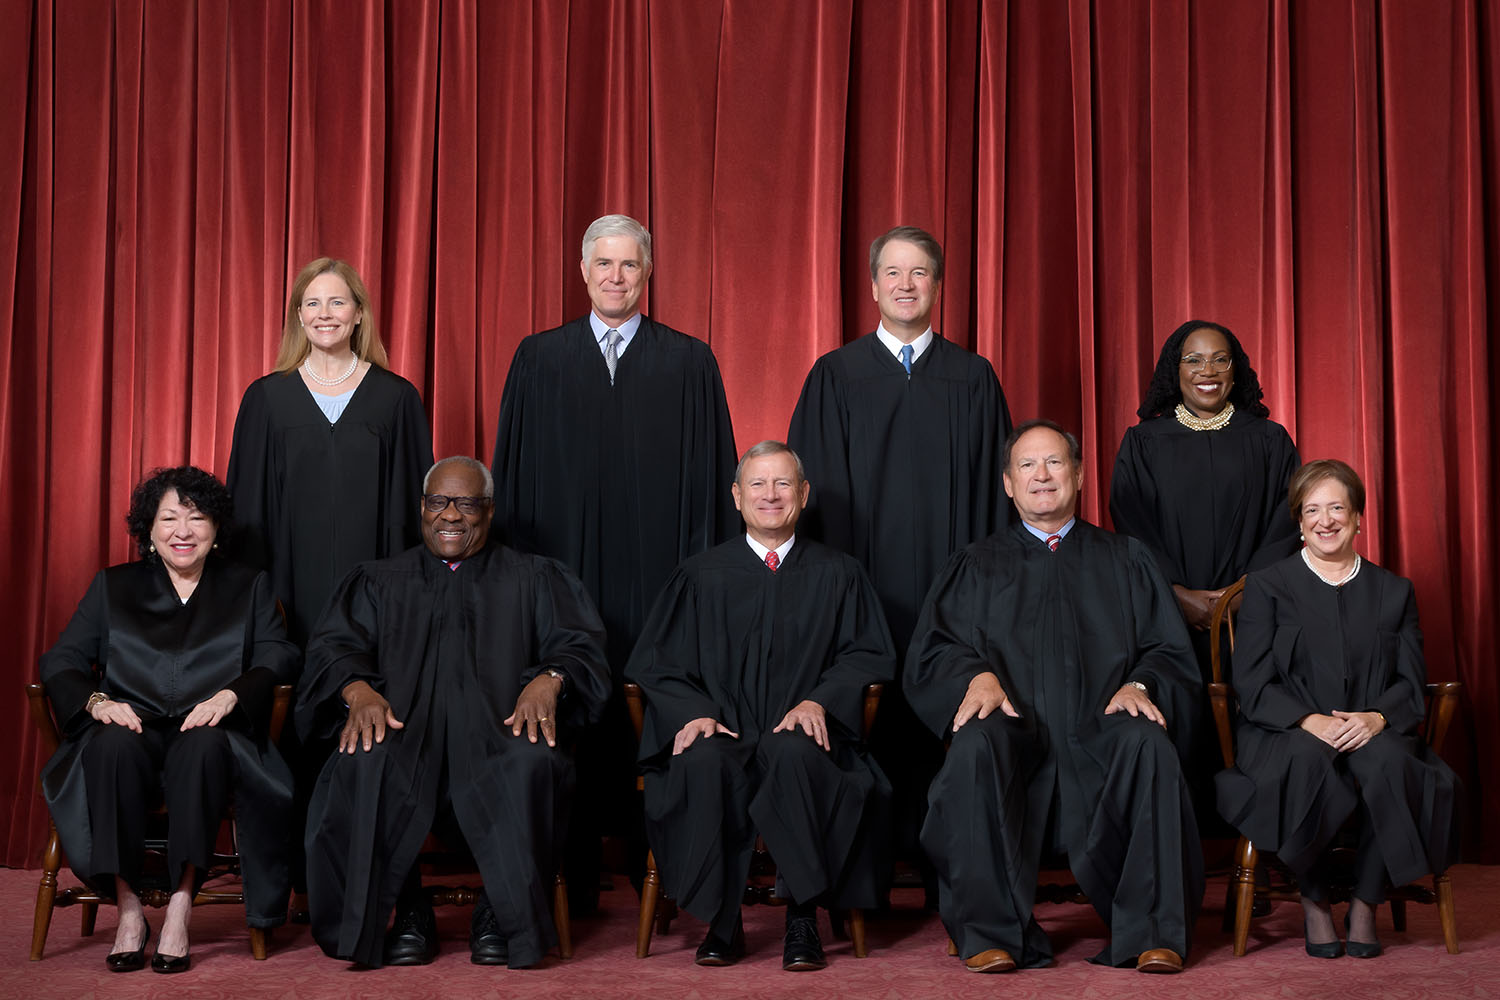 Bipartisan legal scholars group suggests 18-year term limit for US Supreme Court justices